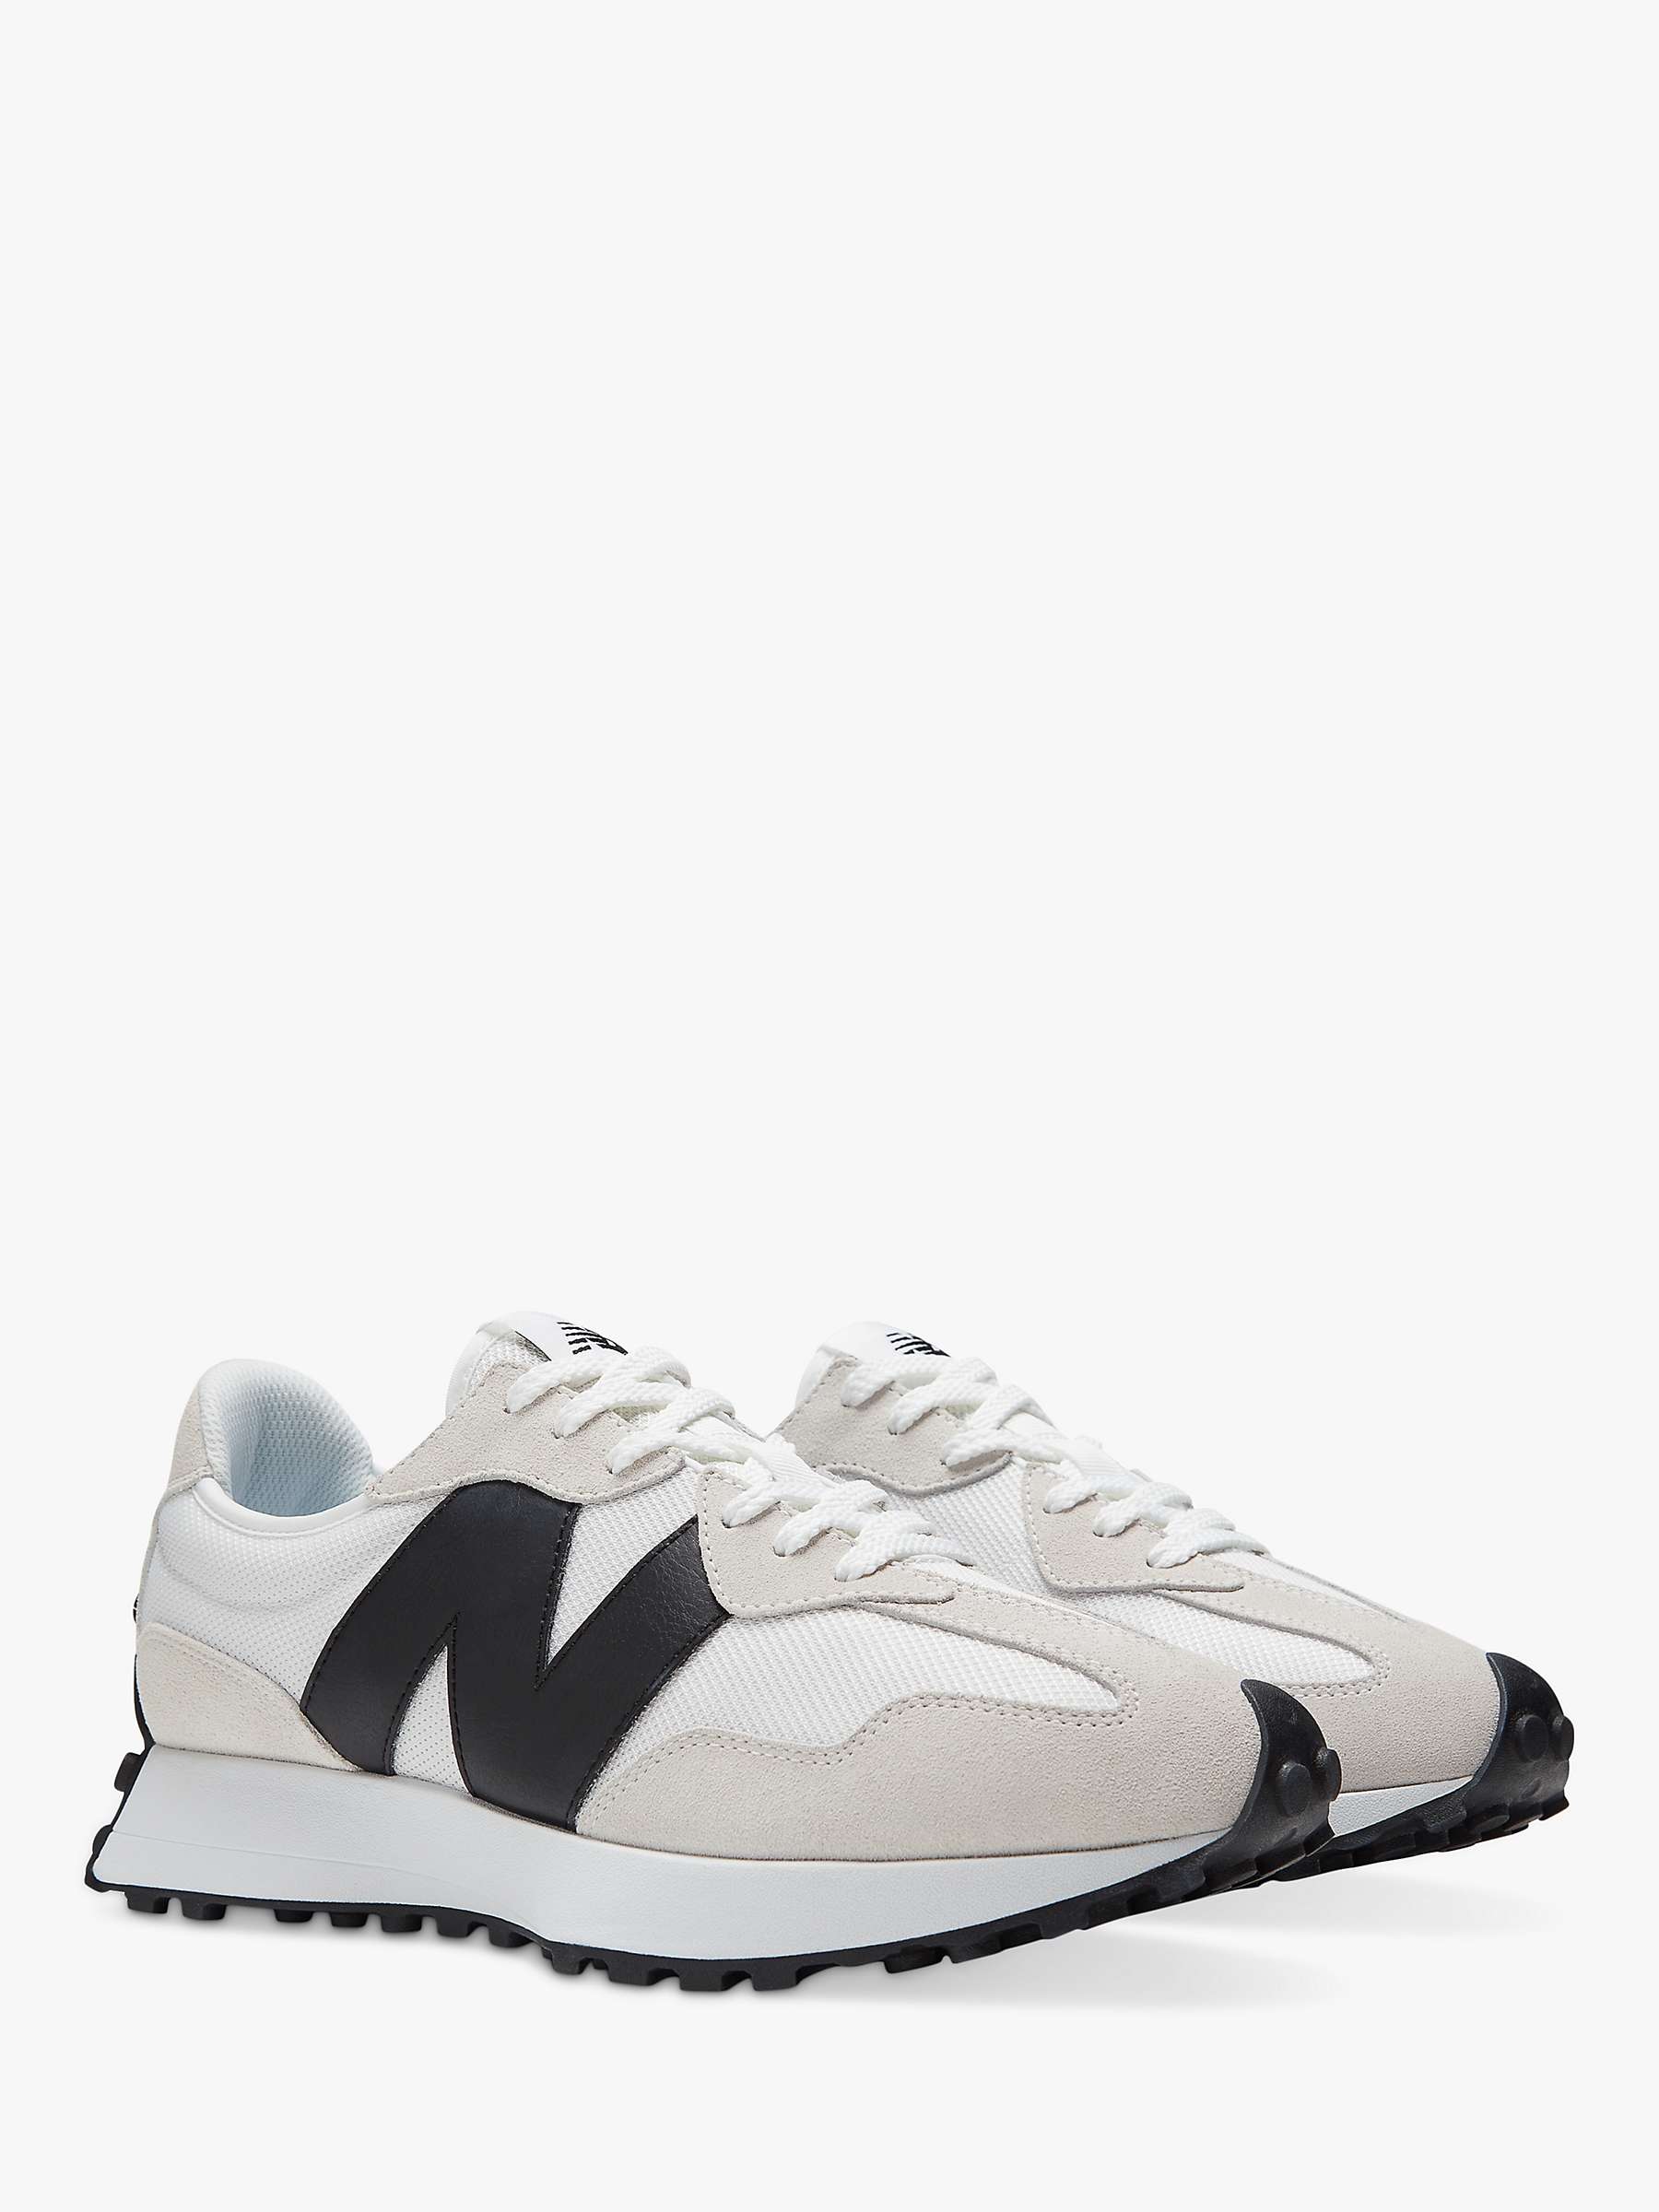 Buy New Balance 327 Retro Trainers Online at johnlewis.com